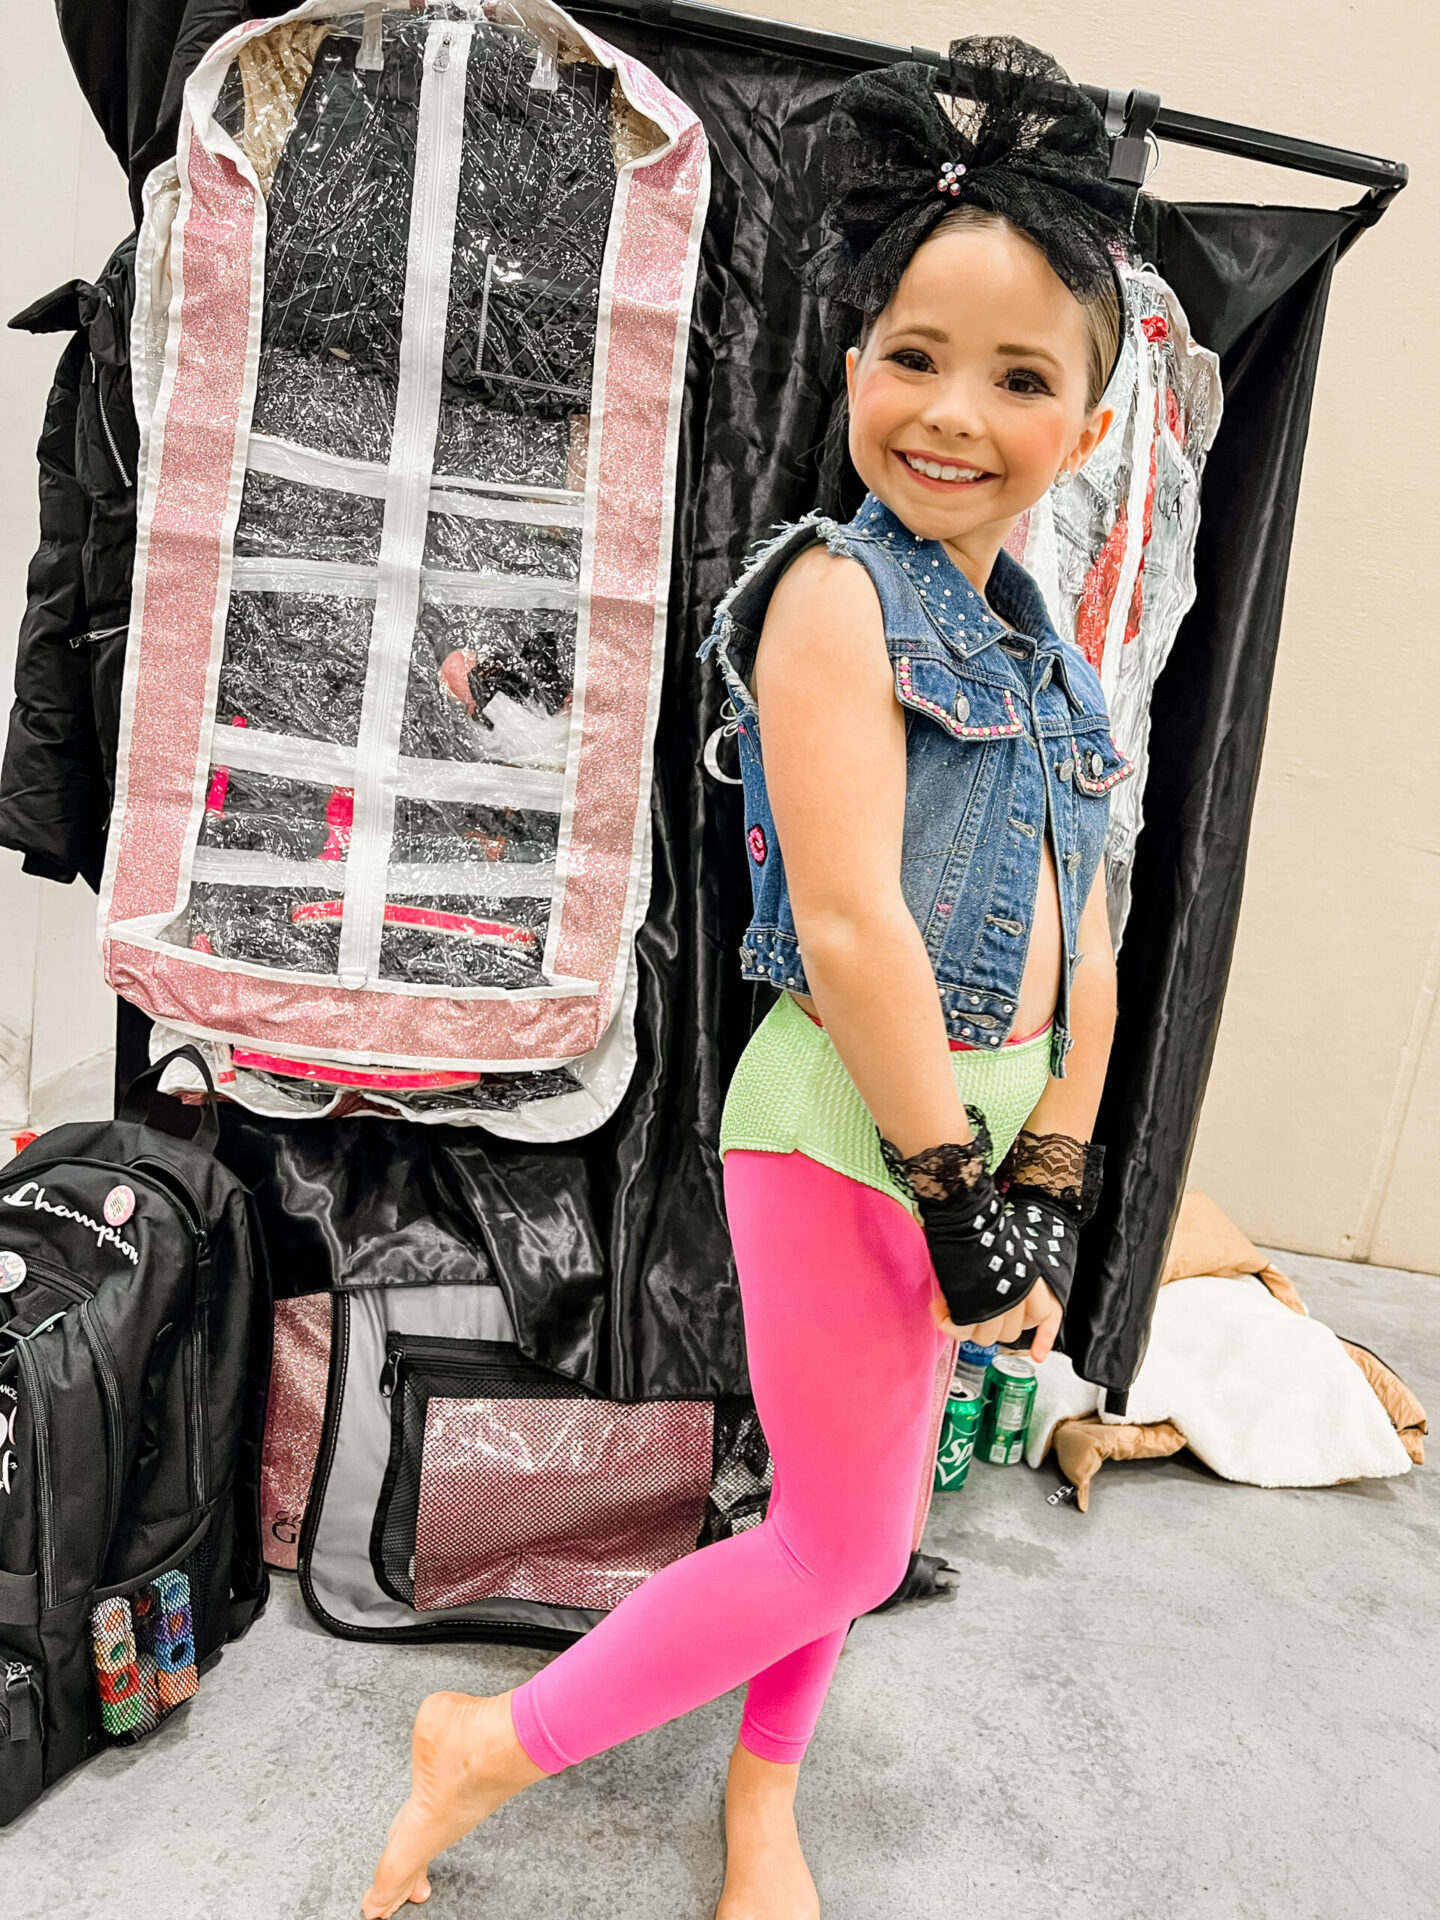 A day in the life of a dance mom featured by Nashville lifestyle blogger, Hello Happiness.